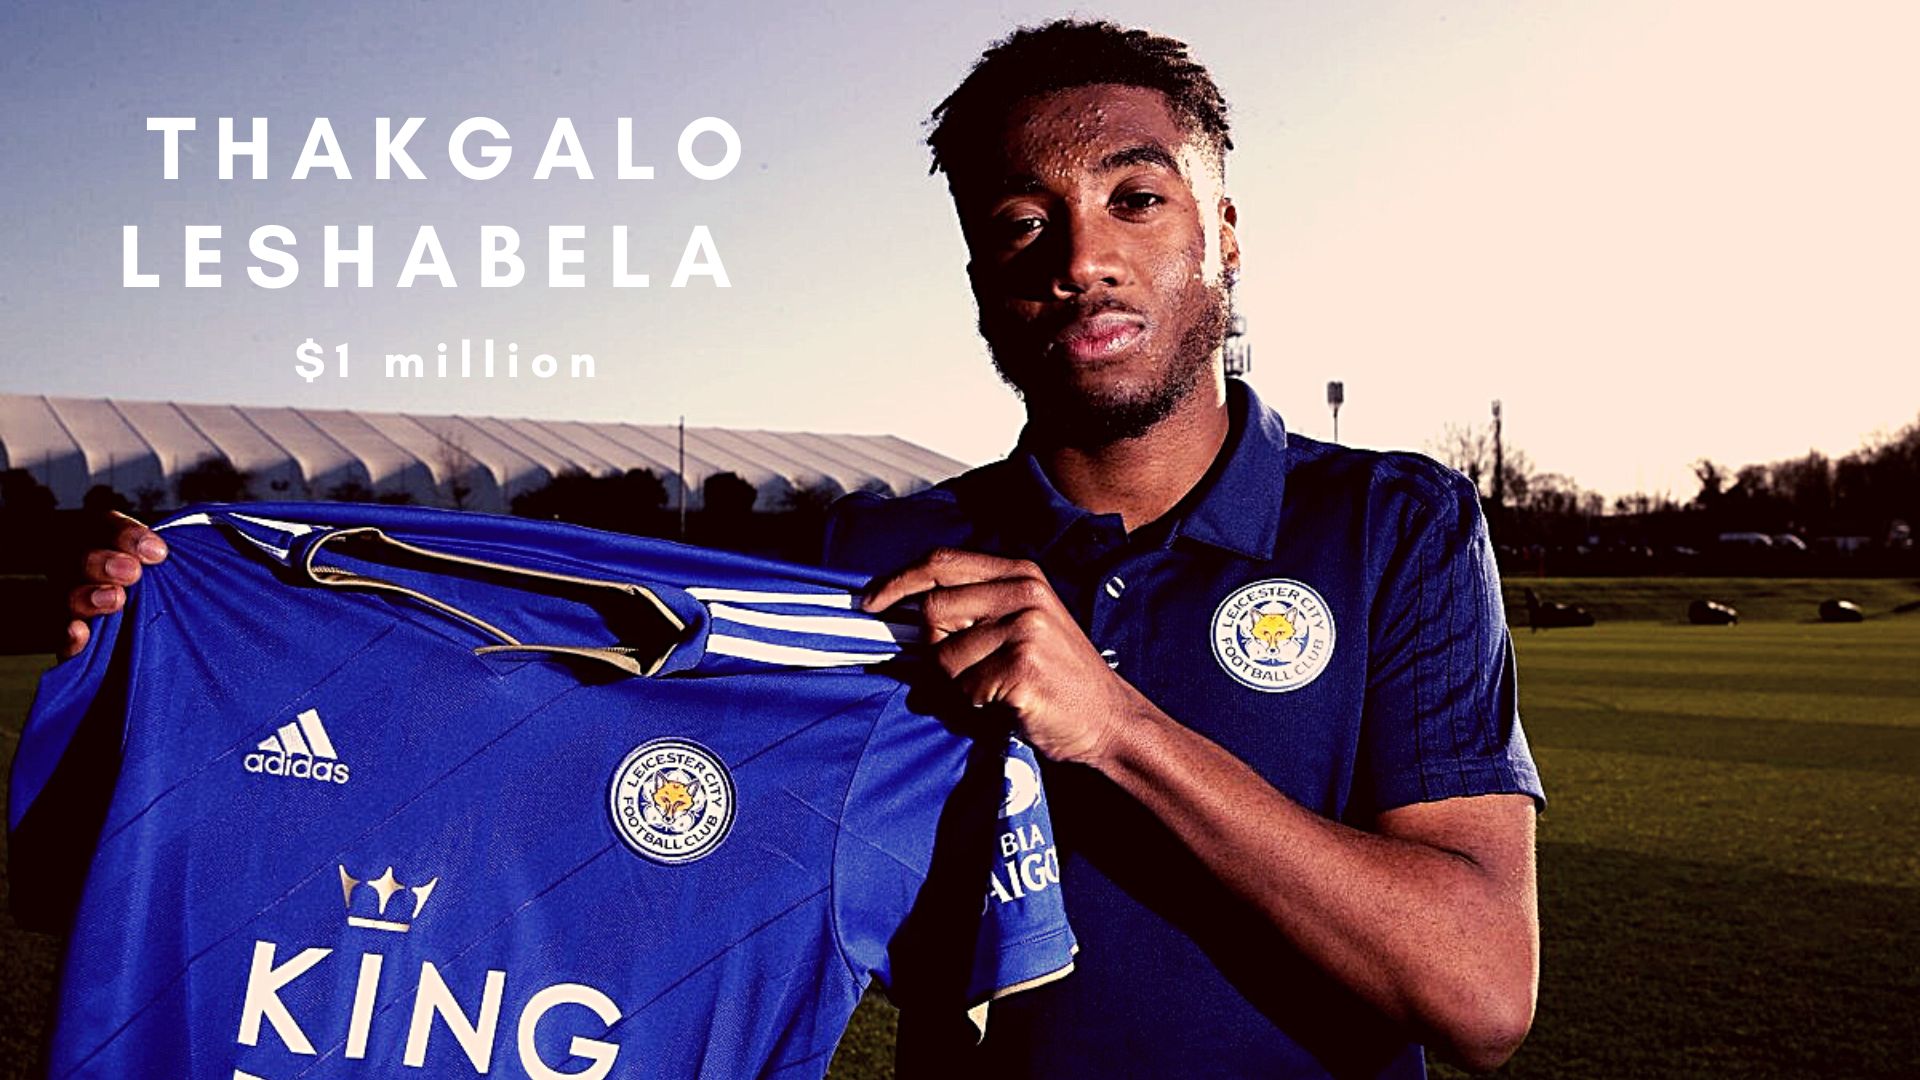 21 year old South African Thakgalo Leshabela comes on for Leicester City and Premier League debut. (Credits: @alimo_philip Twitter)